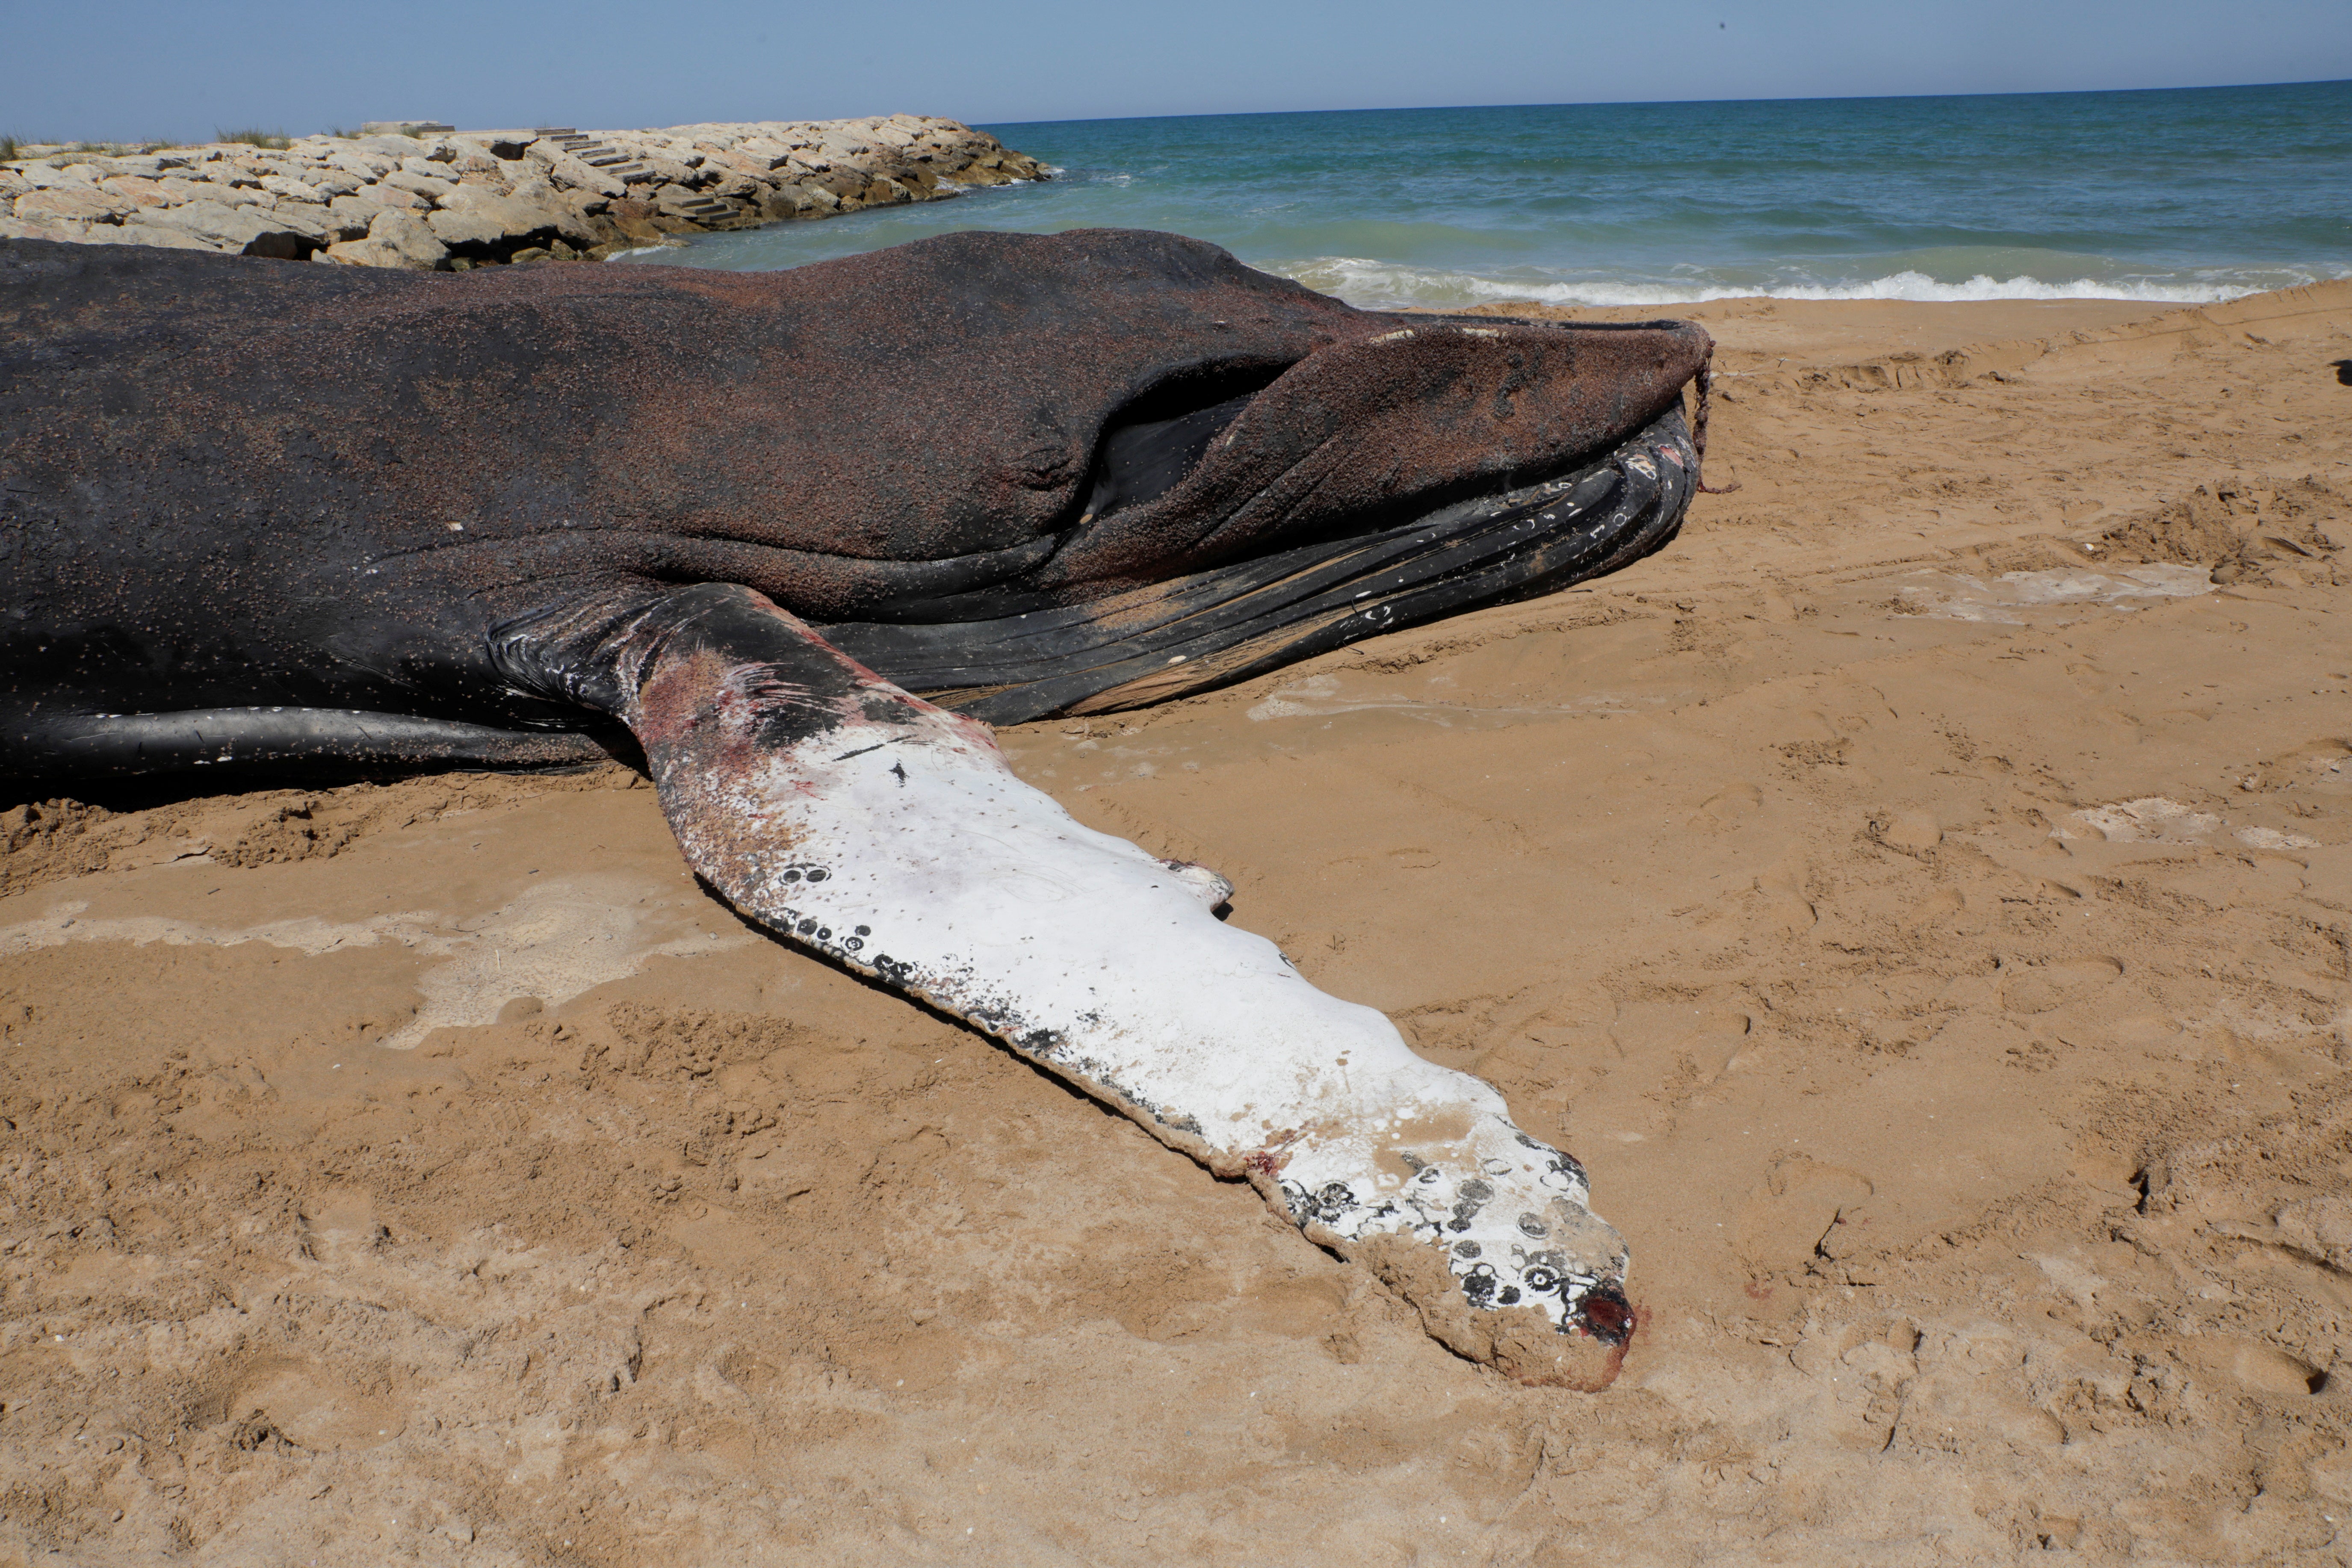 The whale suffered several injuries and was extremely weak